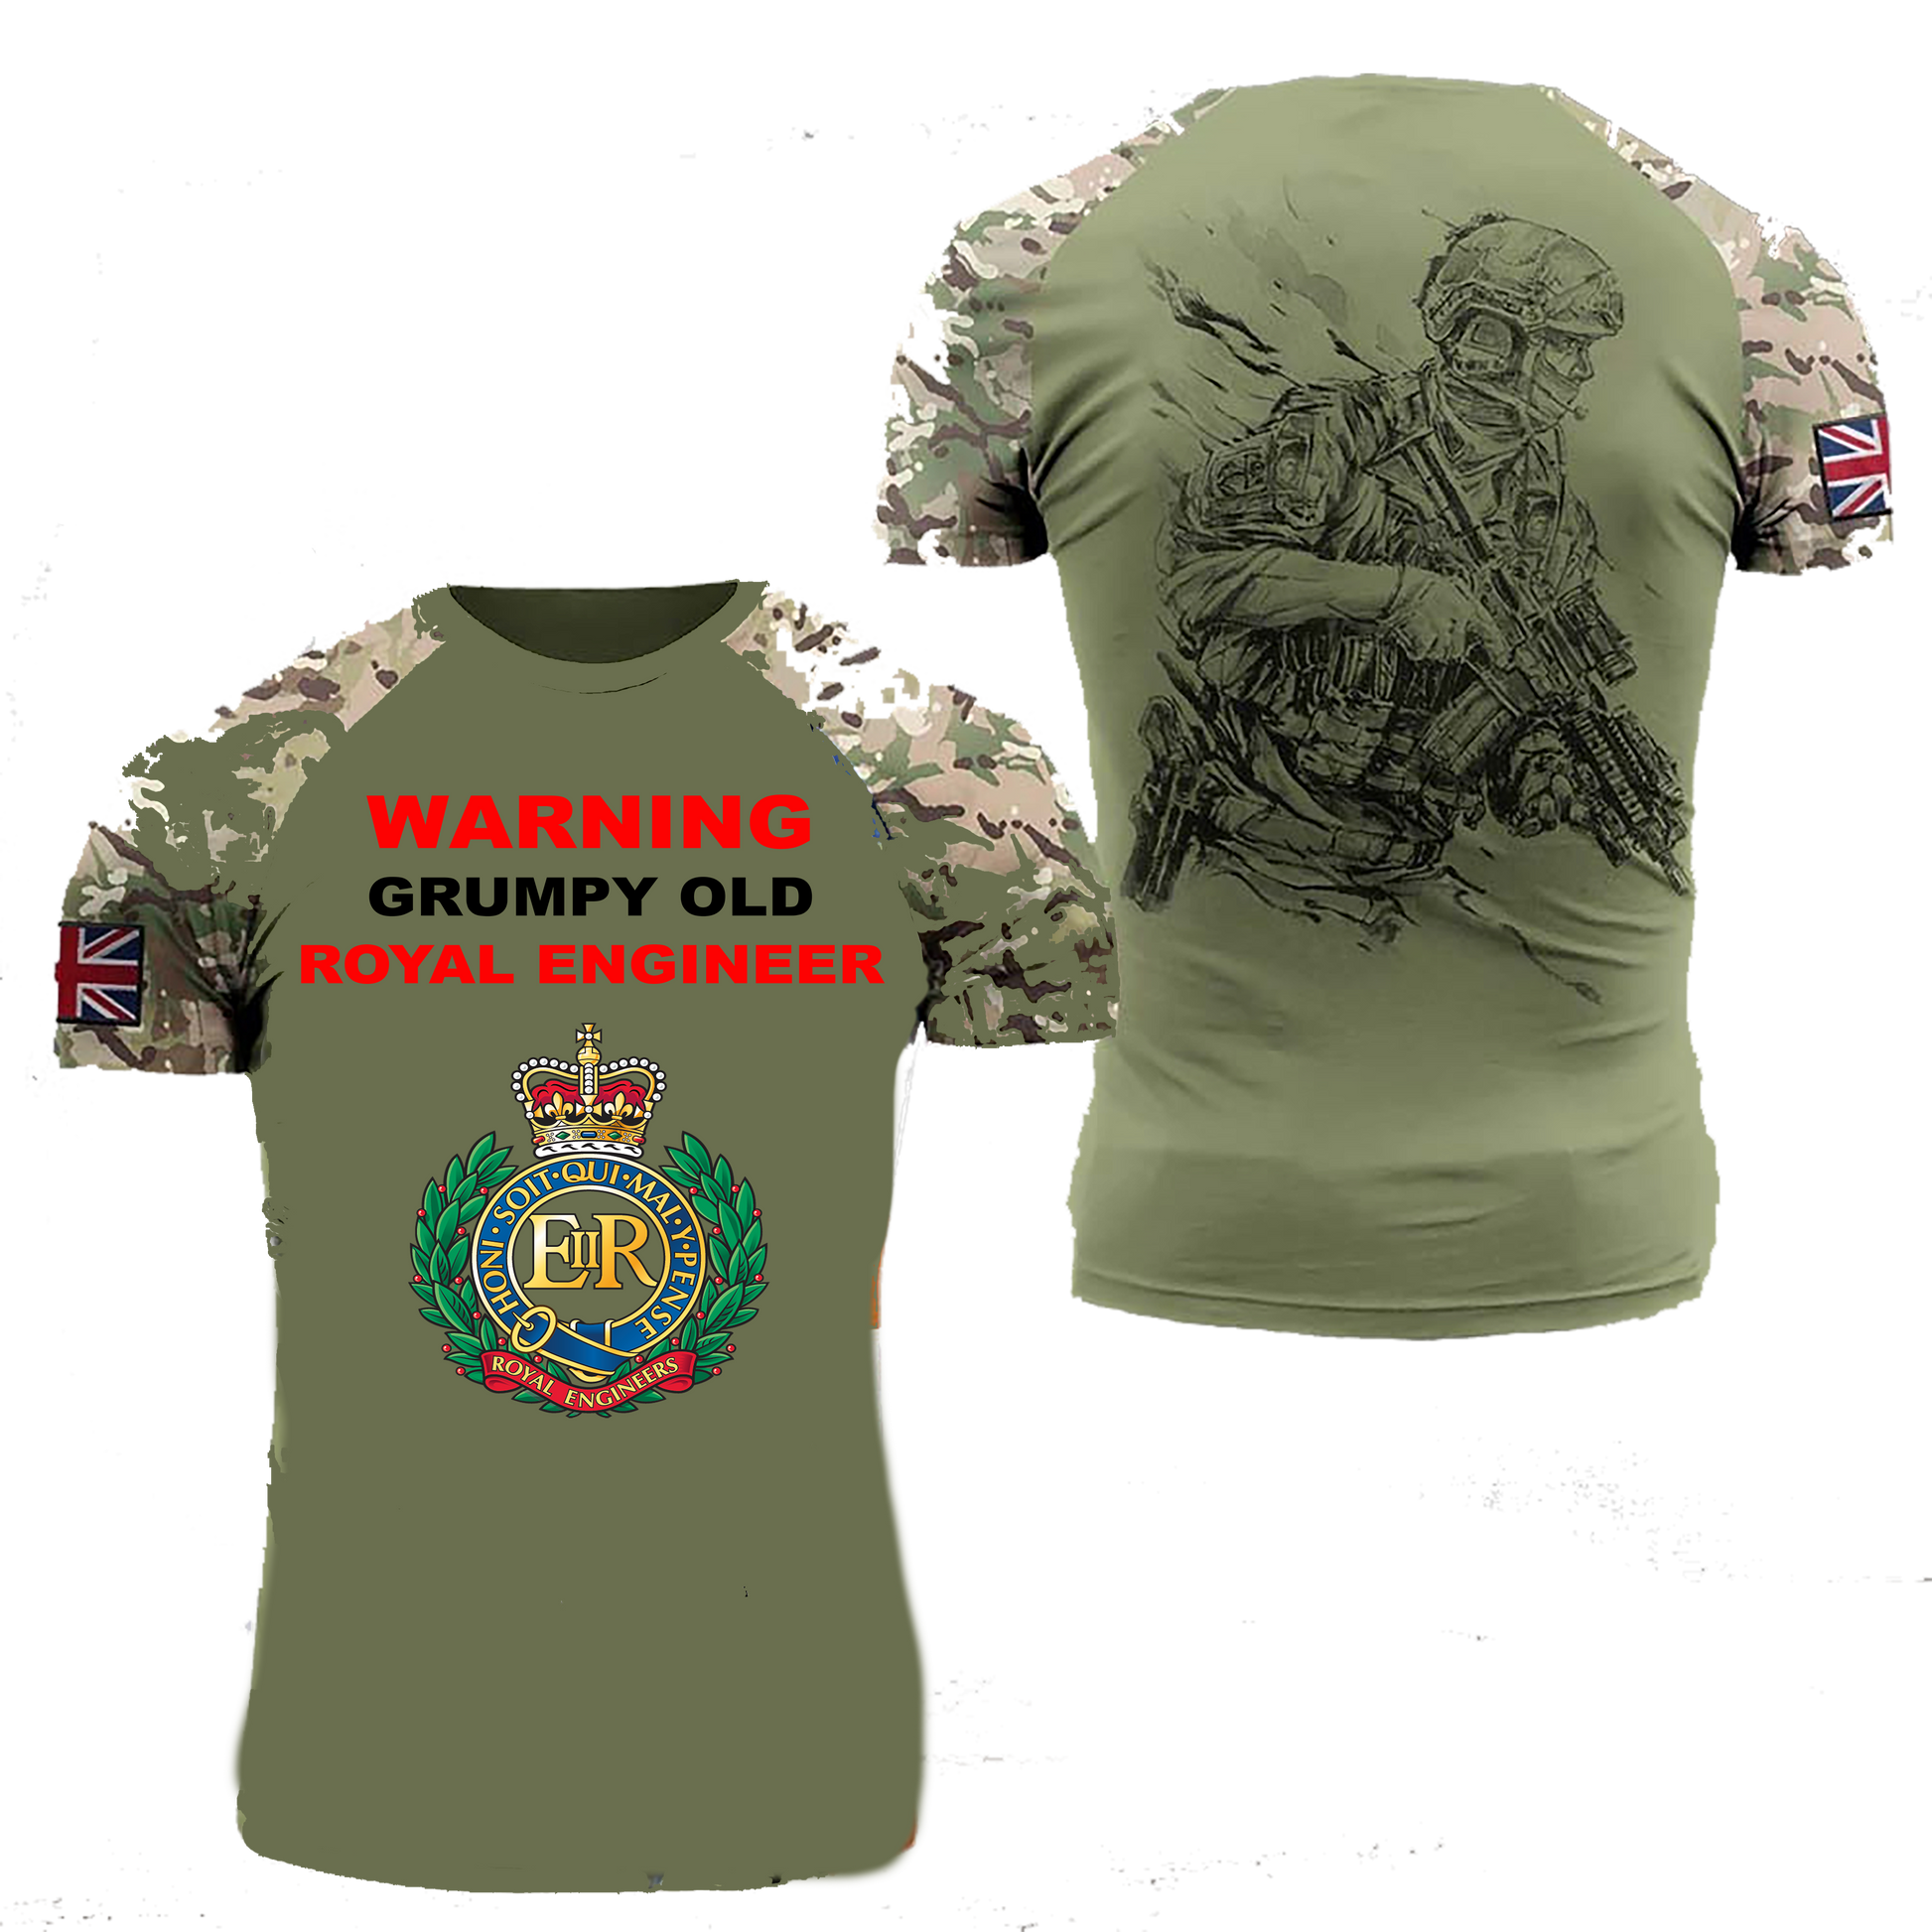 Grumpy Old Royal Engineer Double Printed T-Shirt new for January 2023 - Army 1157 kit Asian Size L = to UK Small Army 1157 Kit